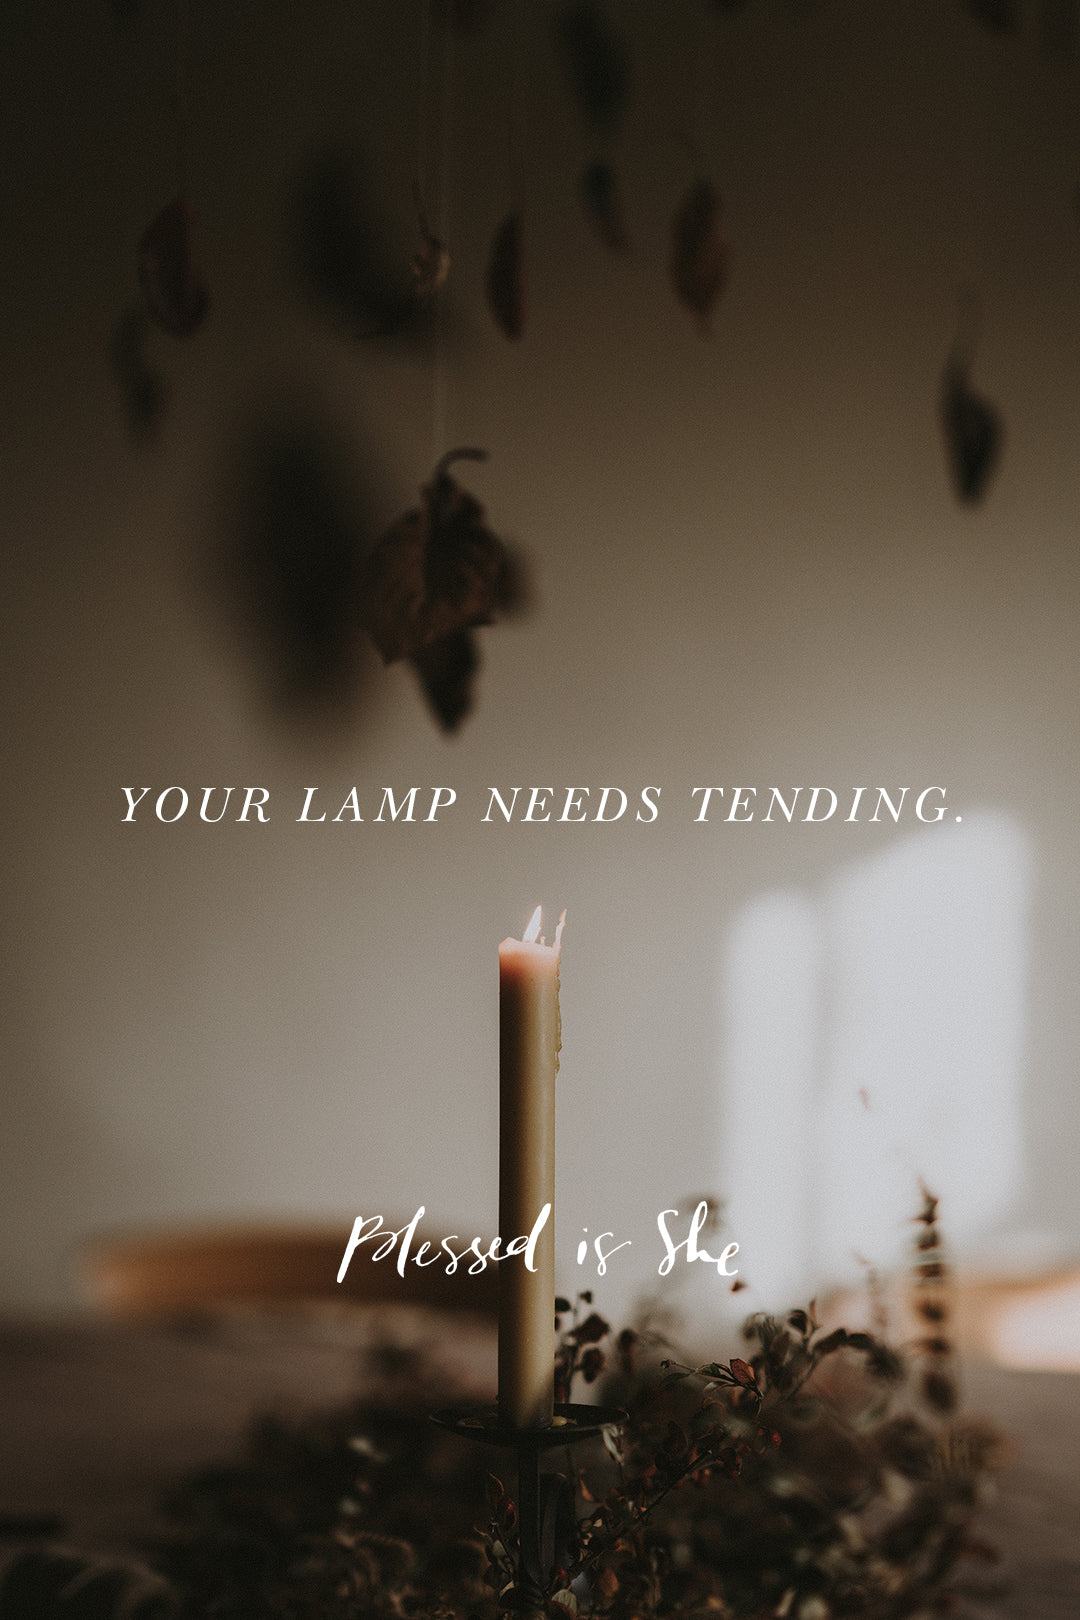 Coffee Makers, Dresses Inside-Out, and Jesus the Lamp Trimmer